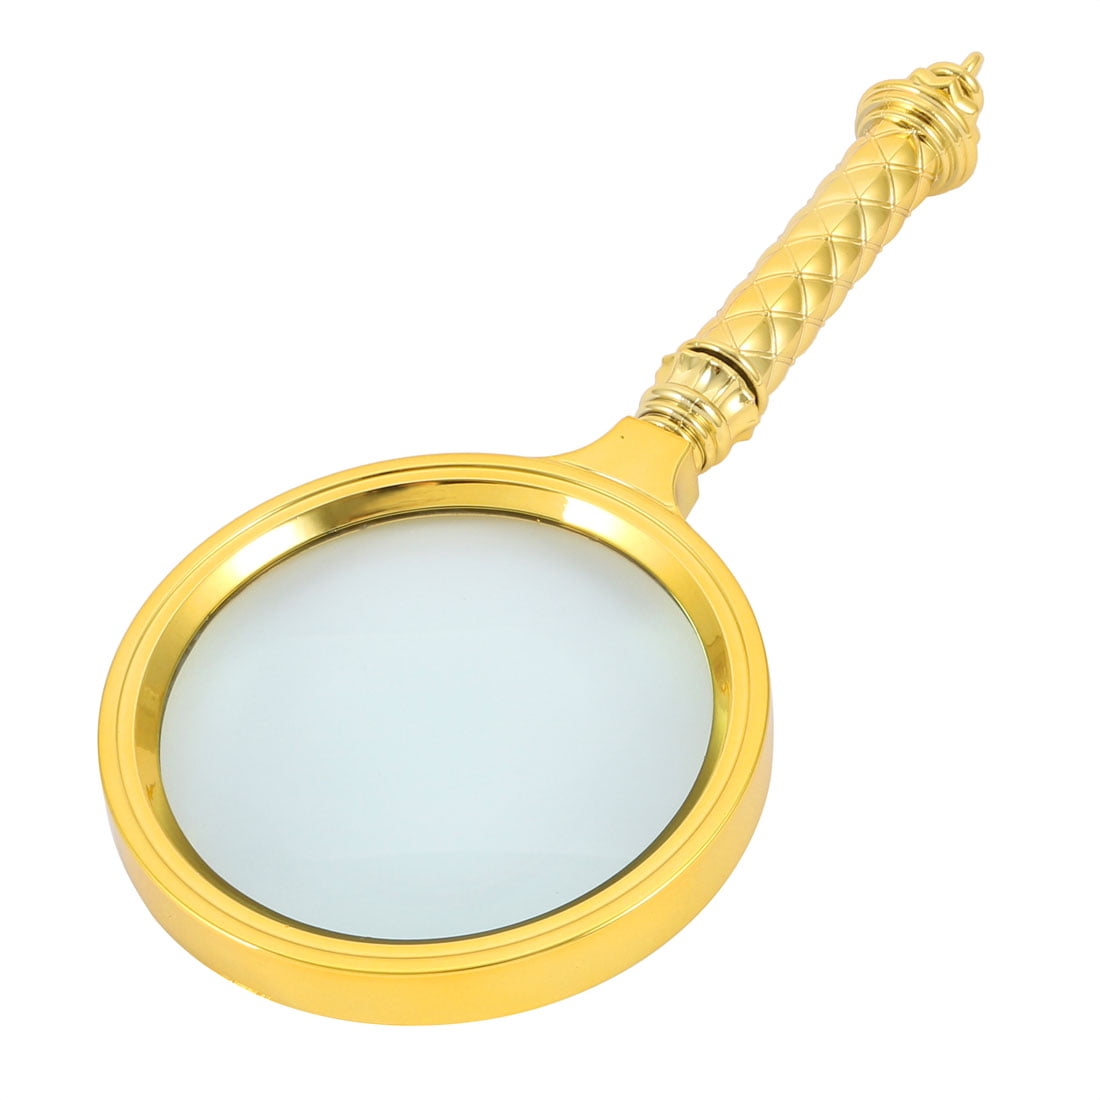 Hot Sale High-definition Charging Handheld Magnifying Glass with